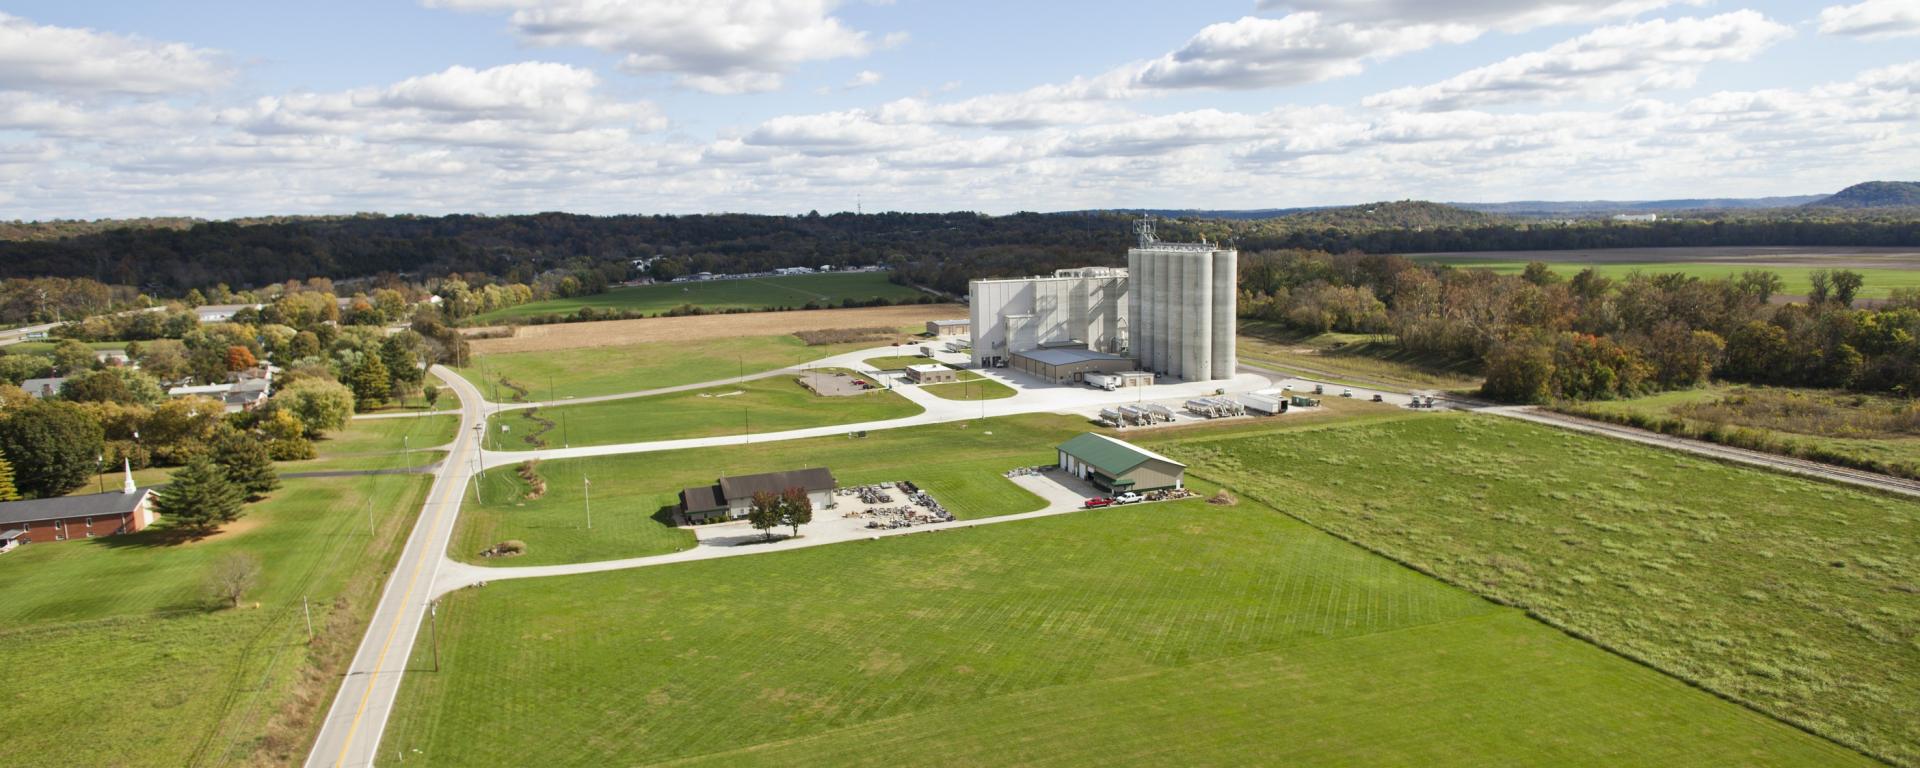 aerial of building and silos